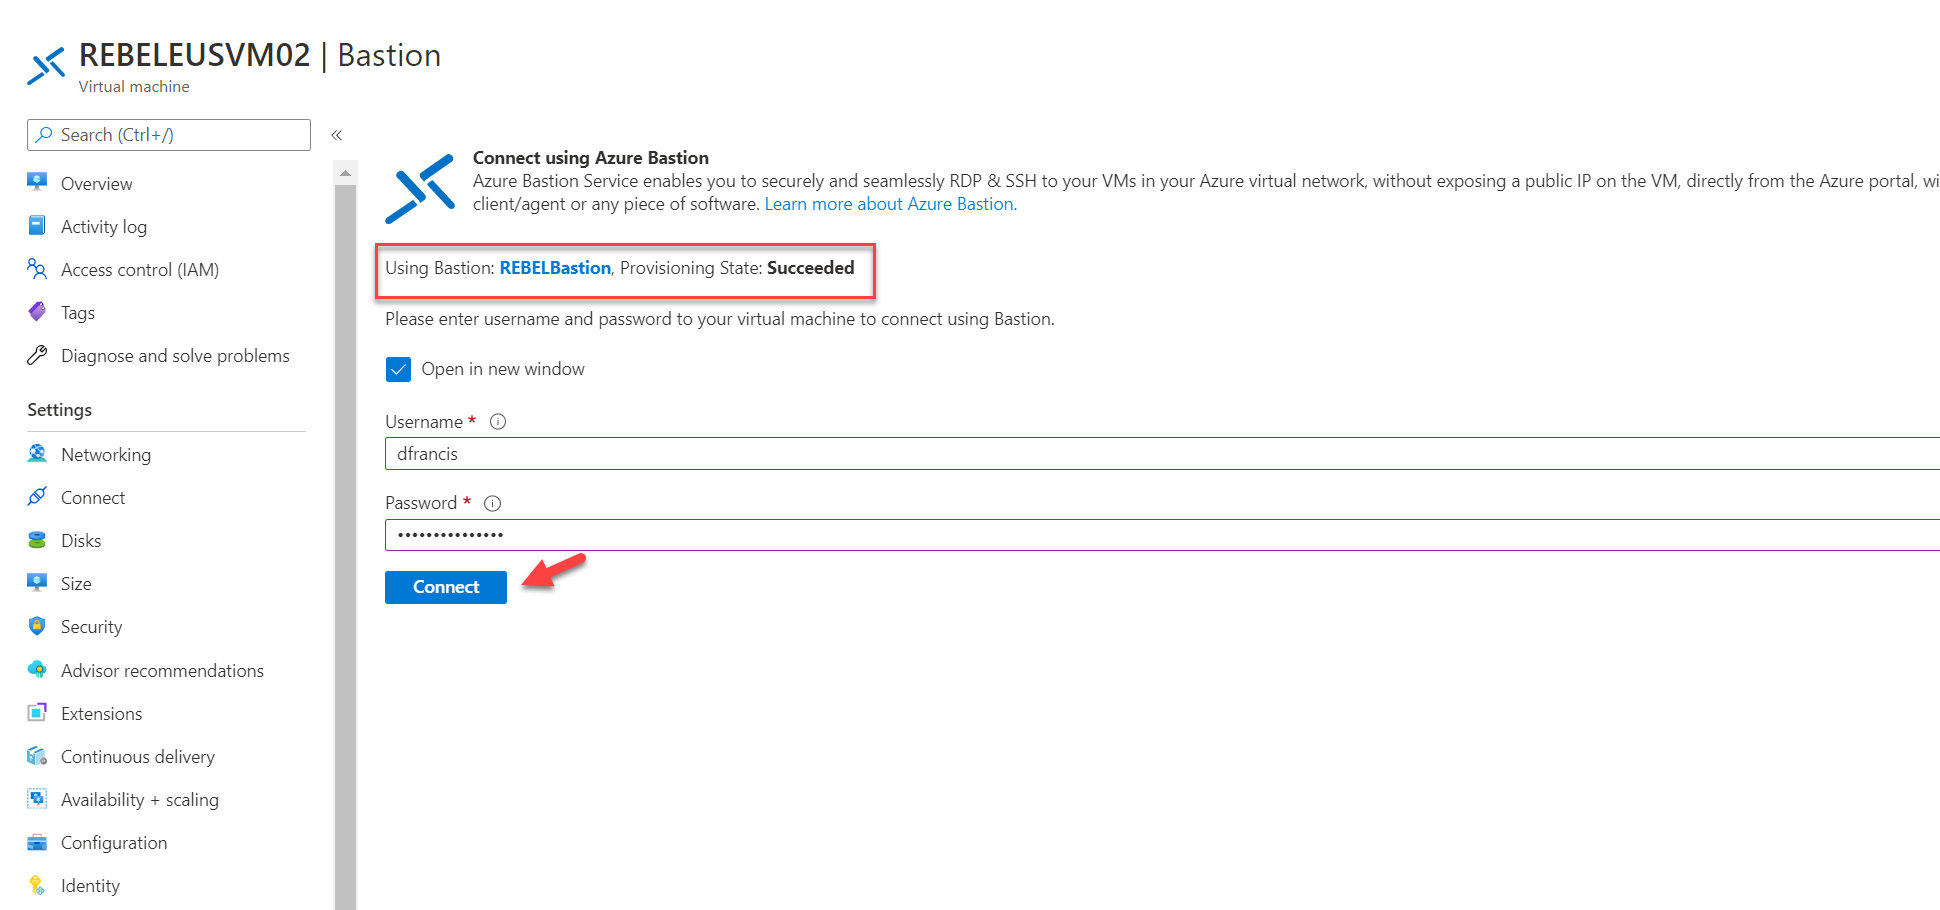 Connect to REBELEUSVM02 using Azure Bastion Option